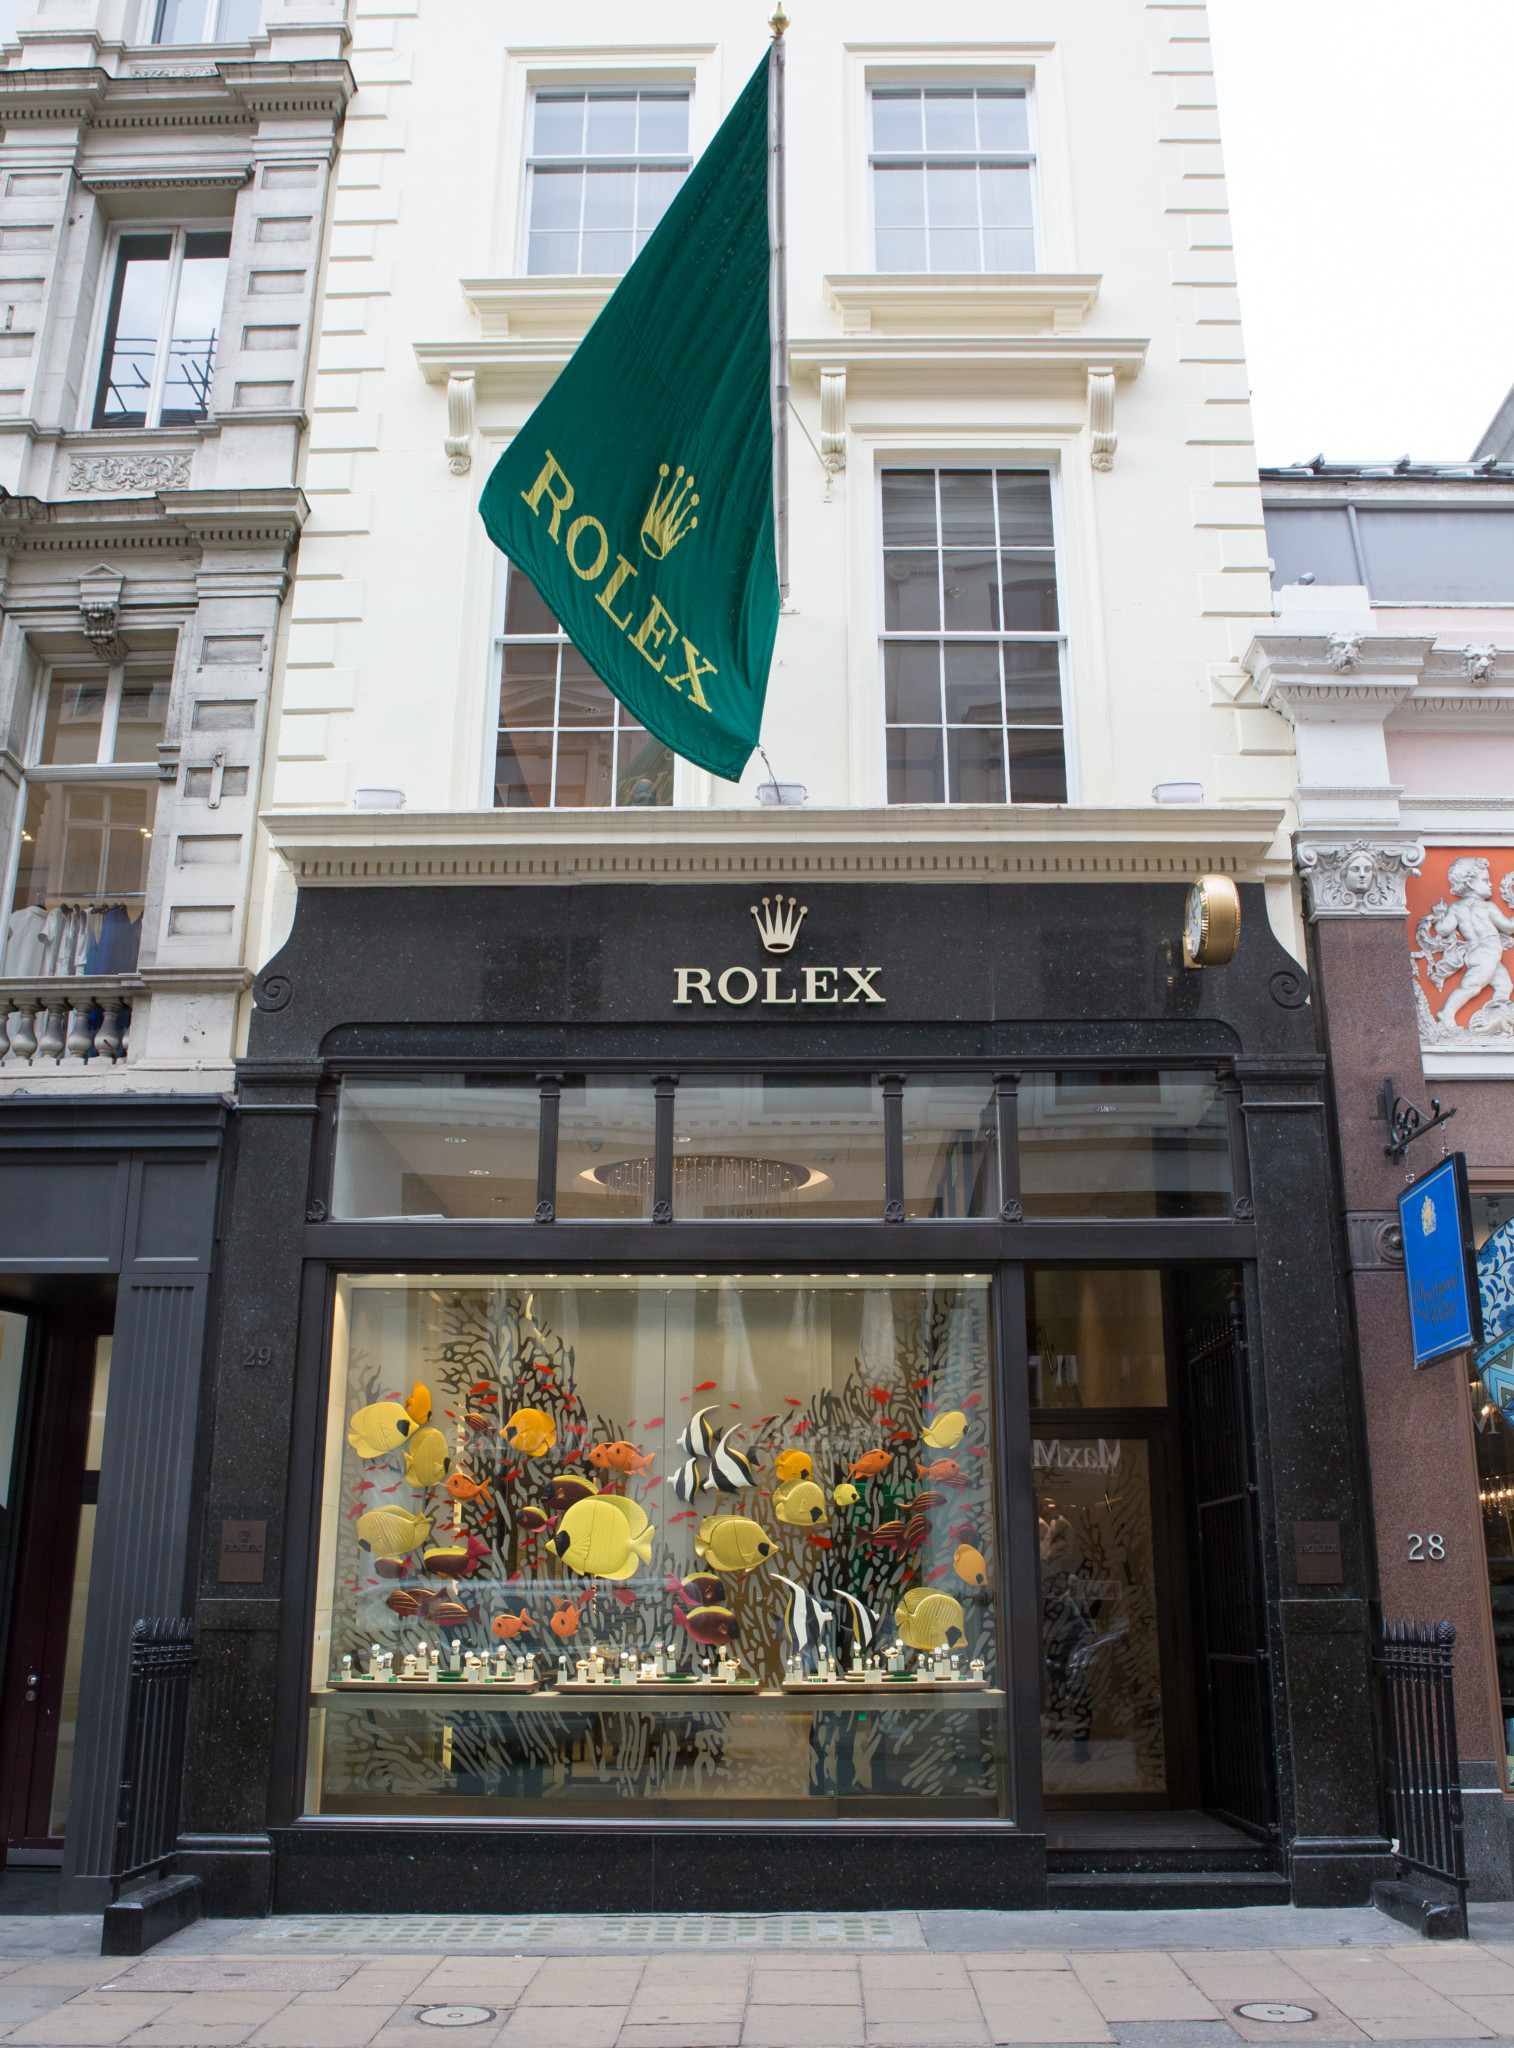 The rolex boutique on london's bond street is run by watches of switzerland.